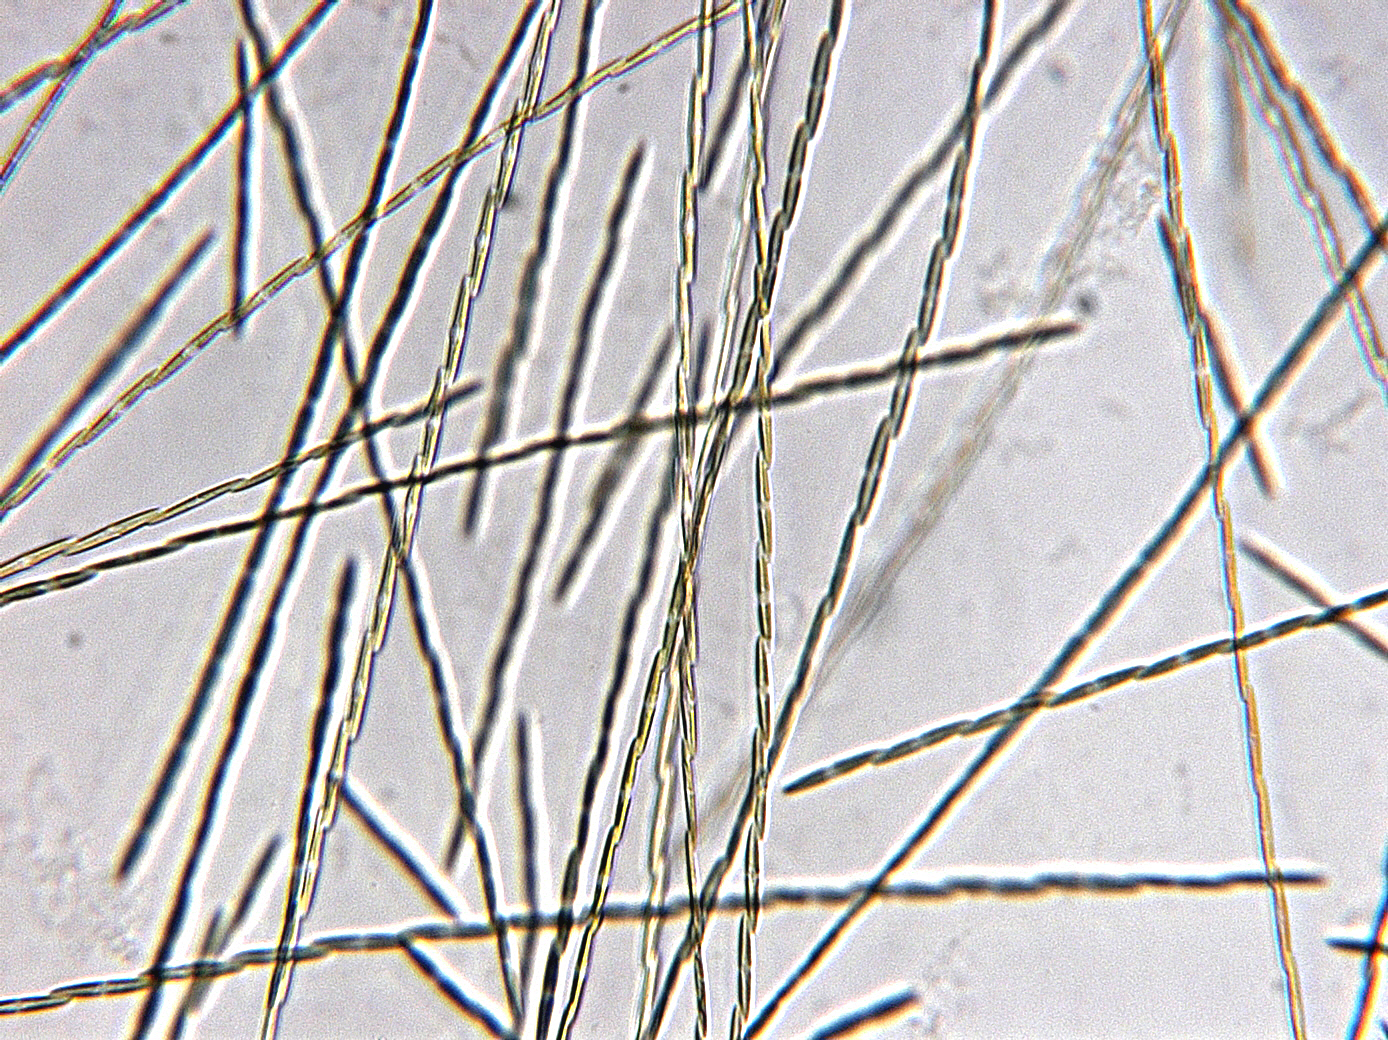 Chains of <em>Pseudo-nitzschia</em> sp. isolated from the Gulf of Maine. (L. Fernandes)